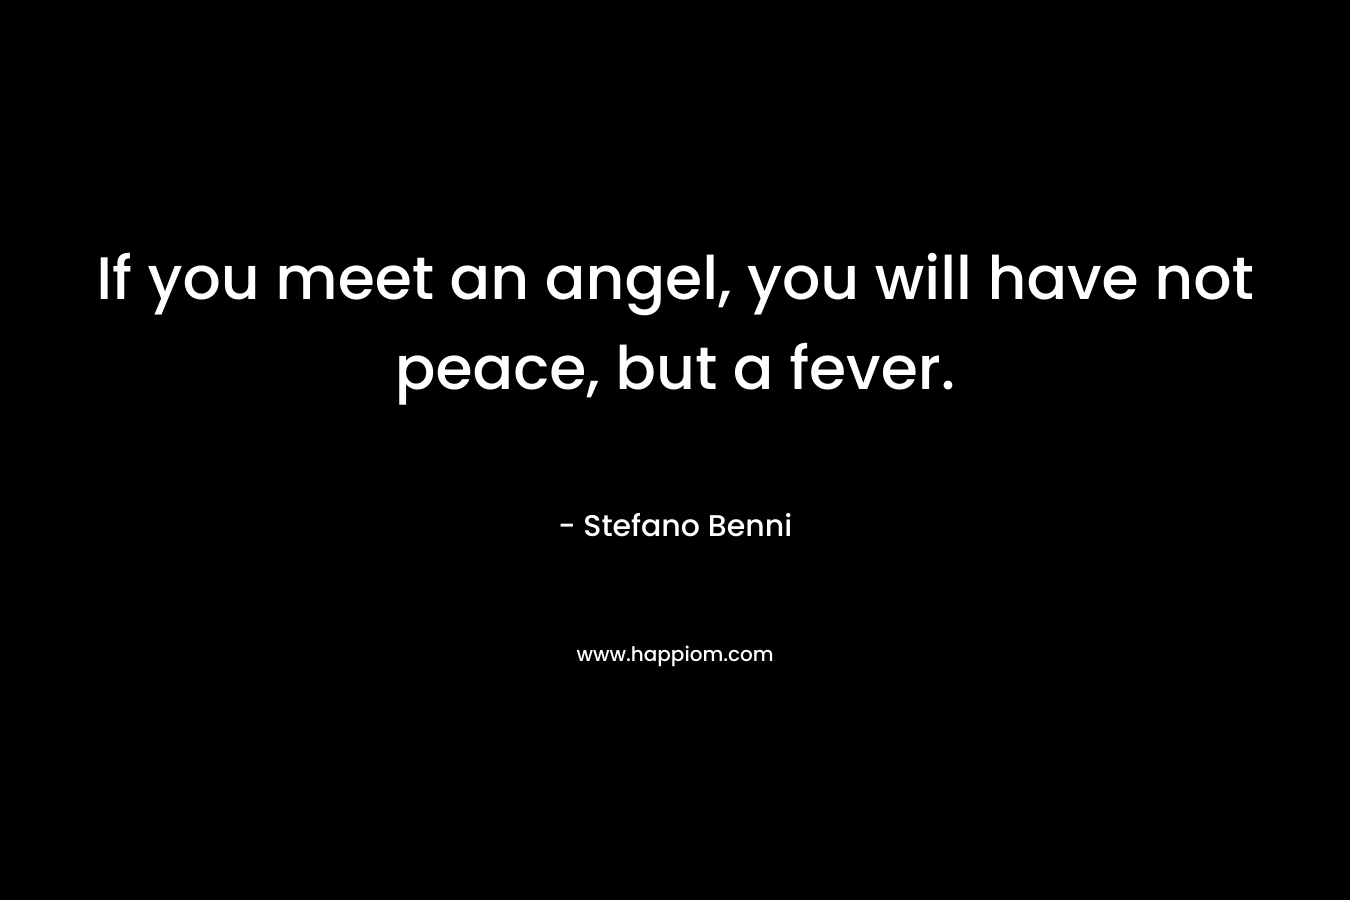 If you meet an angel, you will have not peace, but a fever. – Stefano Benni